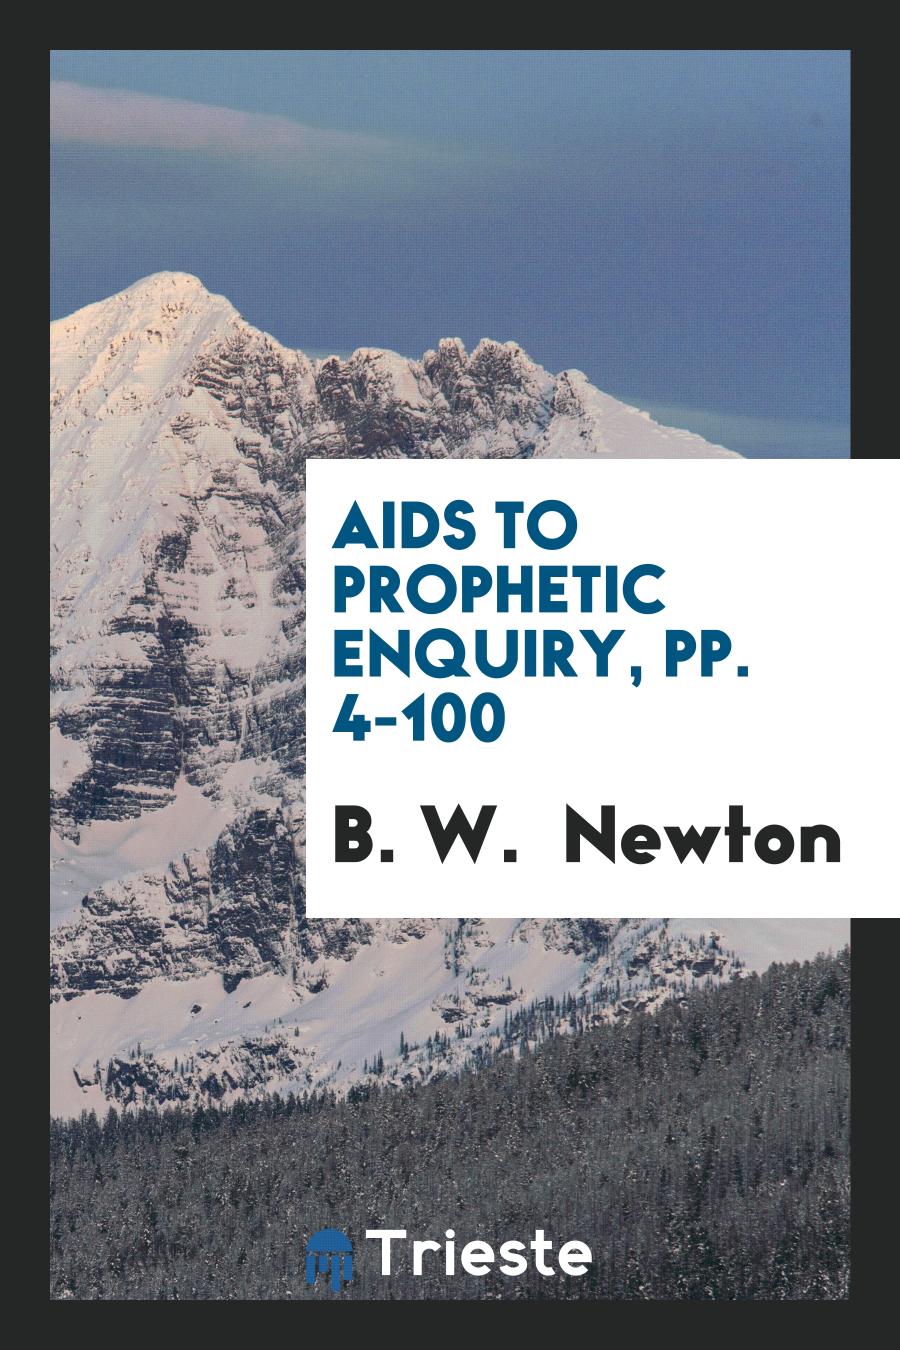 Aids to Prophetic Enquiry, pp. 4-100